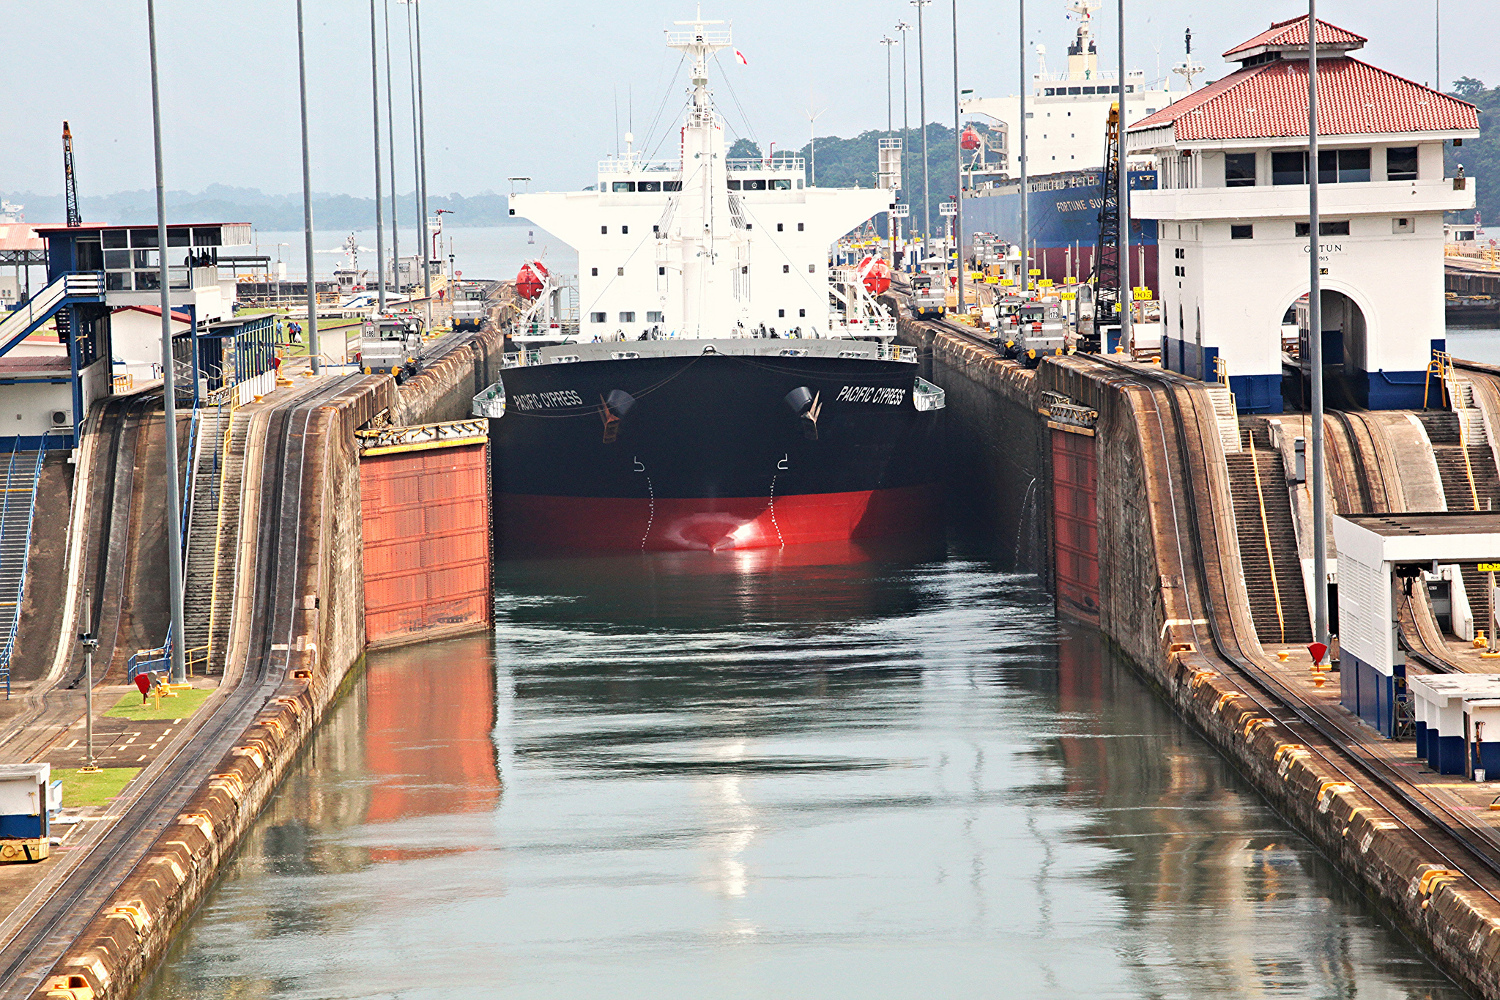 Gatún Lock on Panama Canal: a tourist attraction in its own right. Image by paweesit / CC BY-SA 2.0